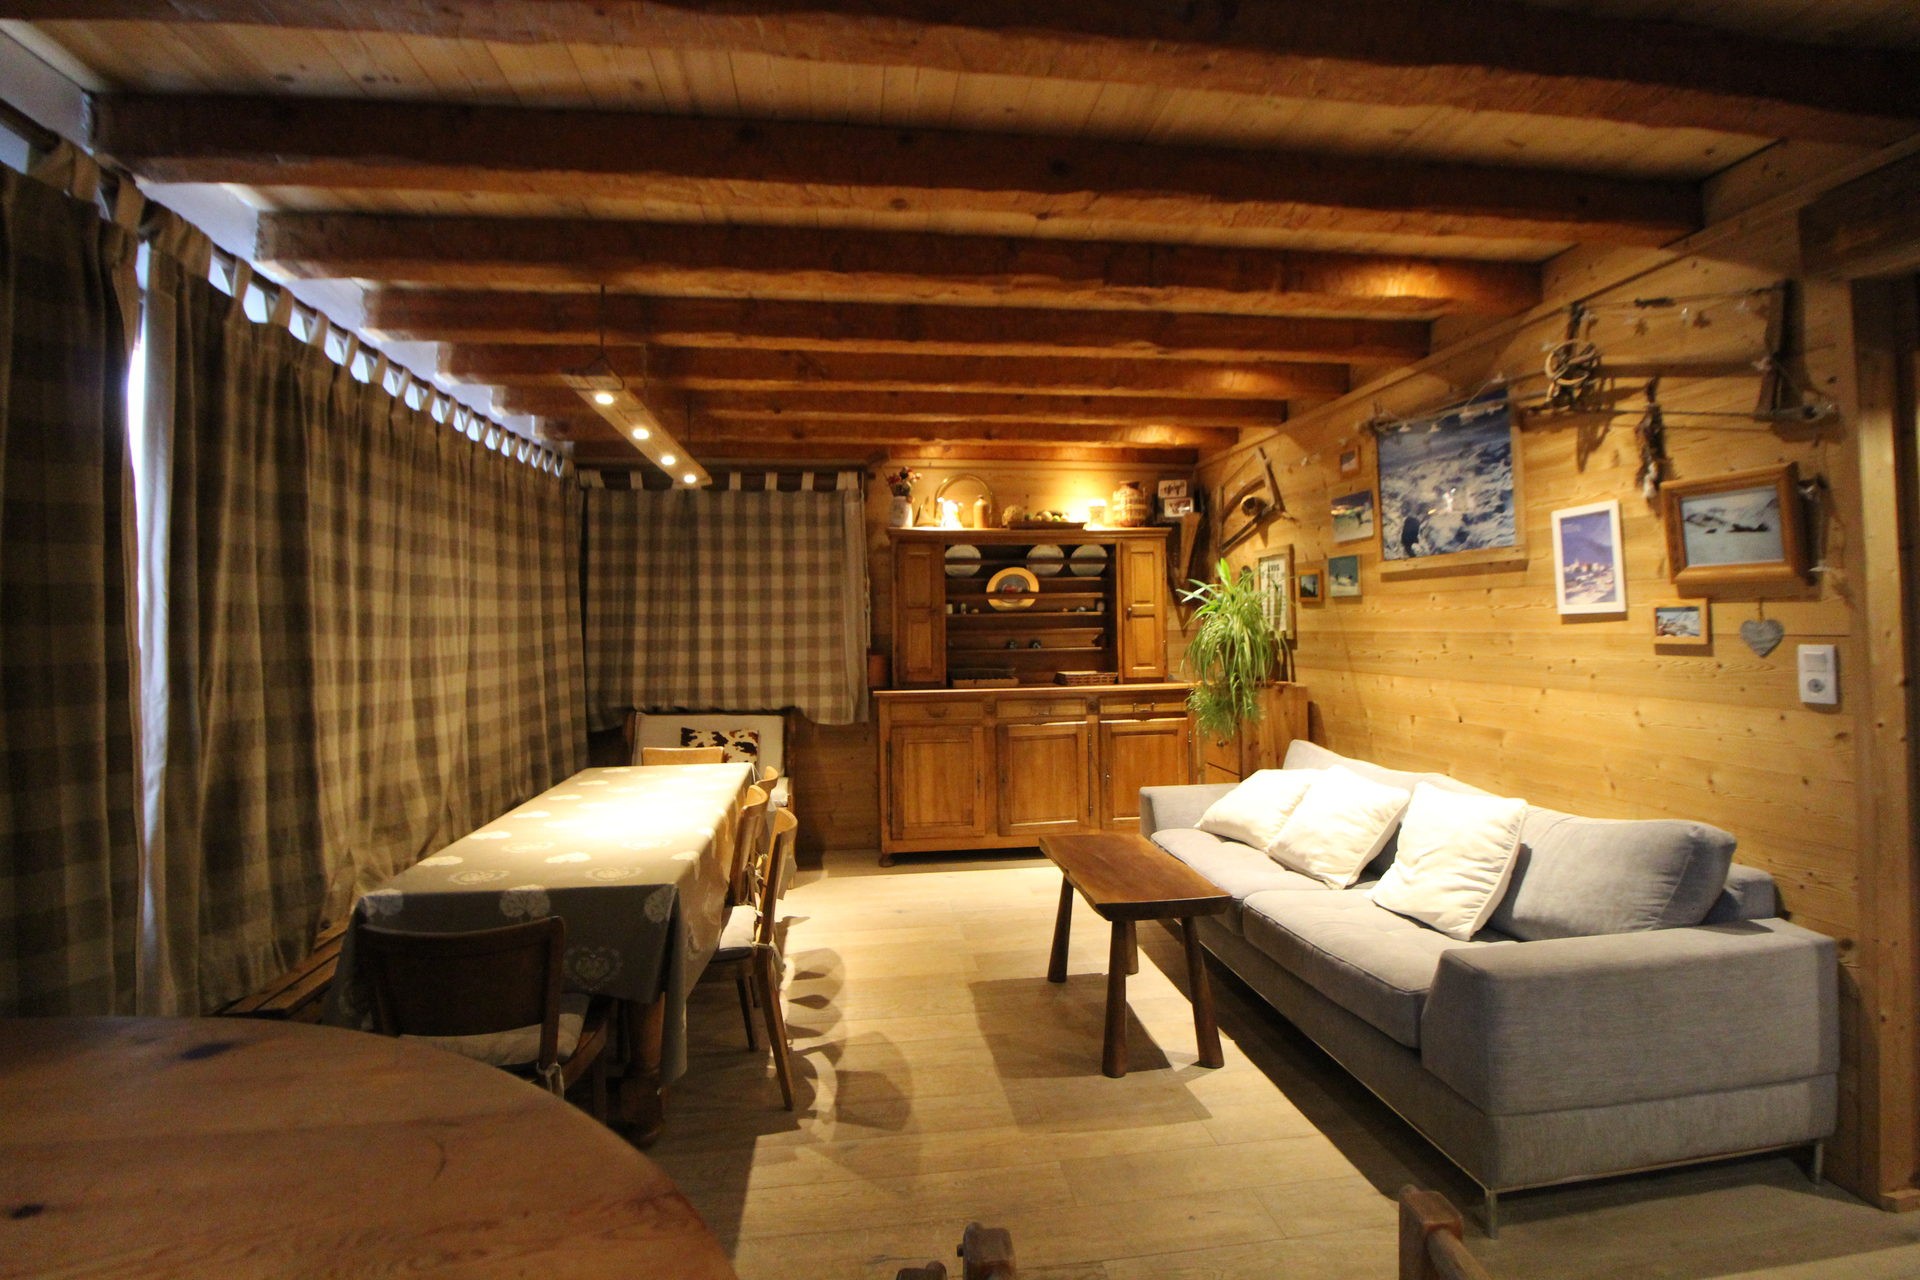 tignes-location-chalet-luxe-valukate